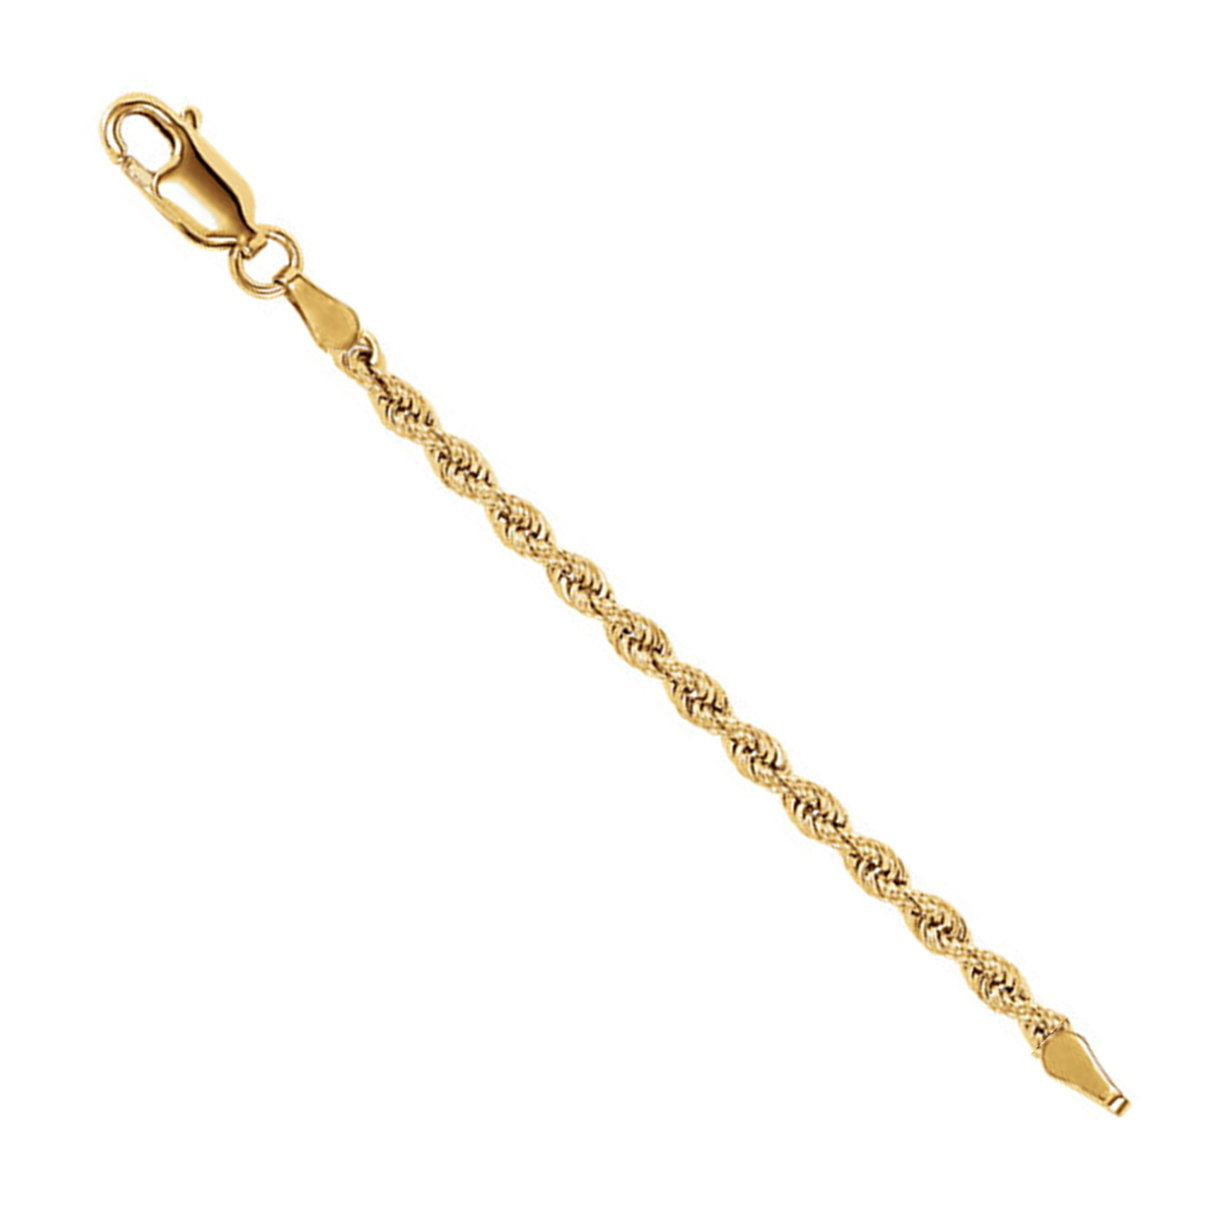 2.5mm Extender Rope Chain in 14k yellow gold offered in 3 inch and 2.25 inch lengths.